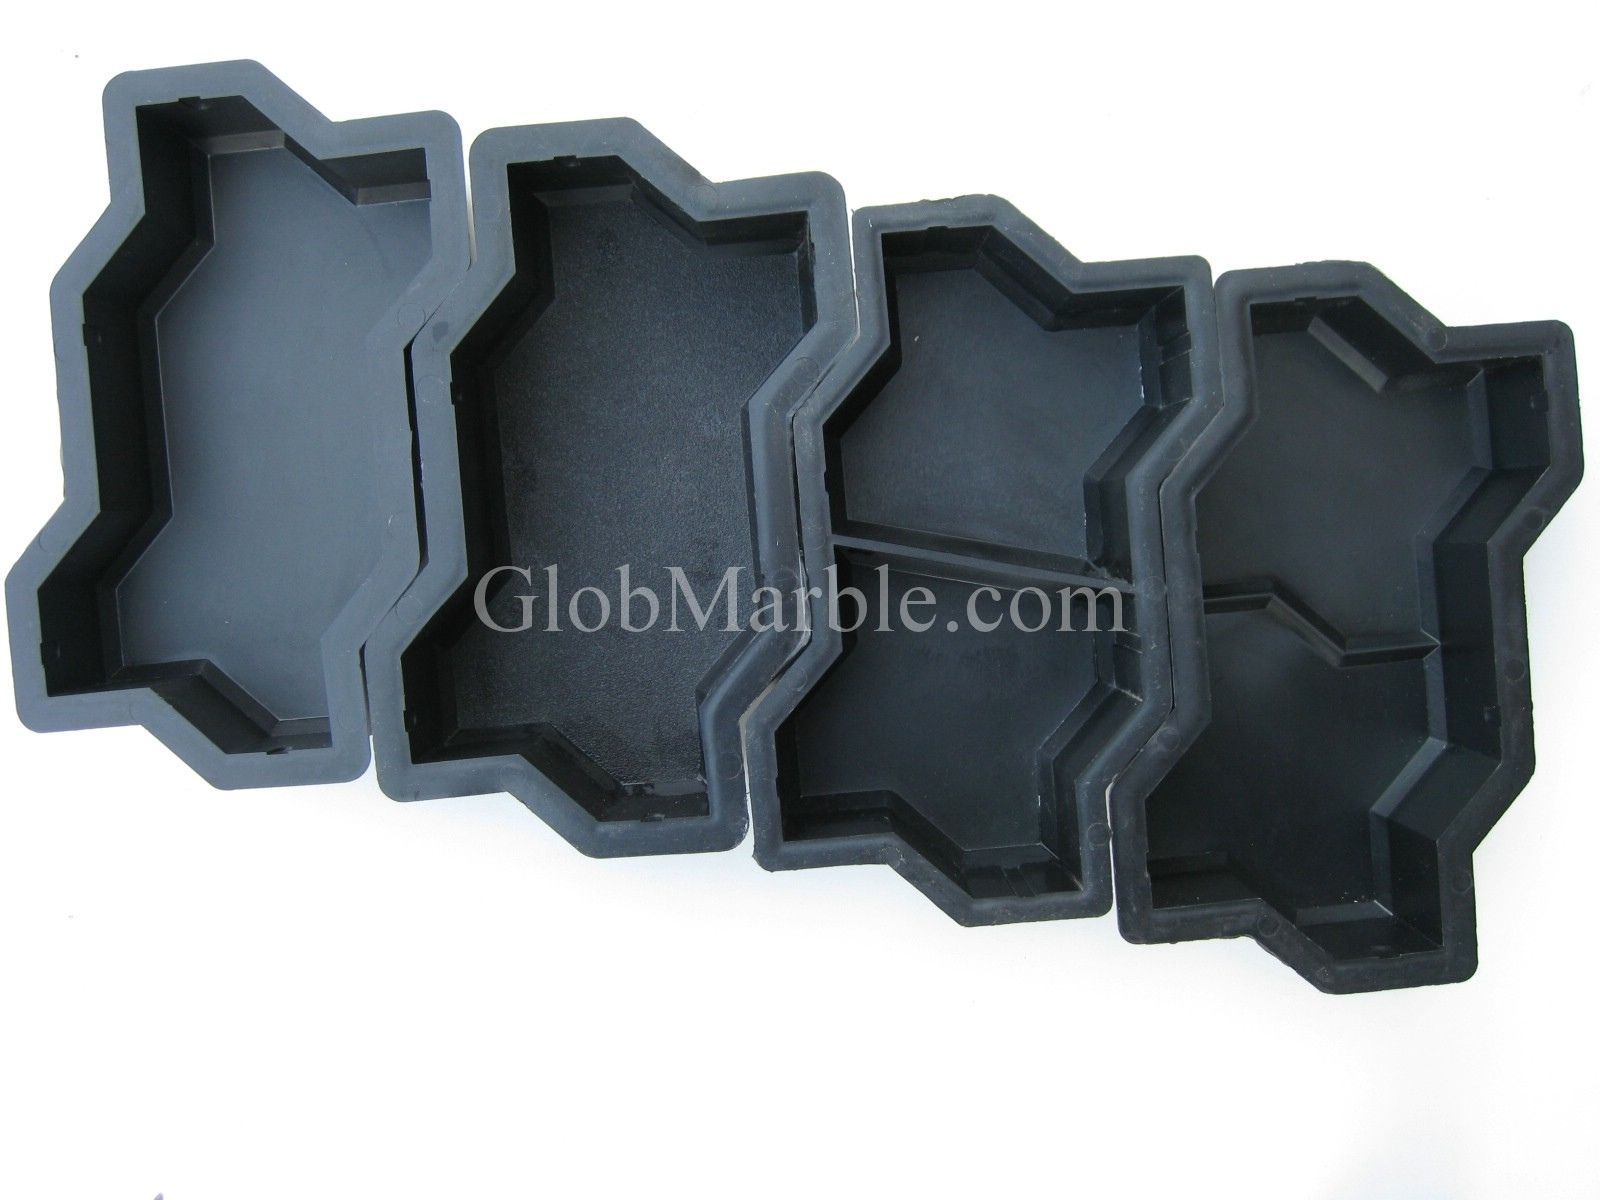 Paver Stone Molds 3030 Concrete Stepping and 50 similar items